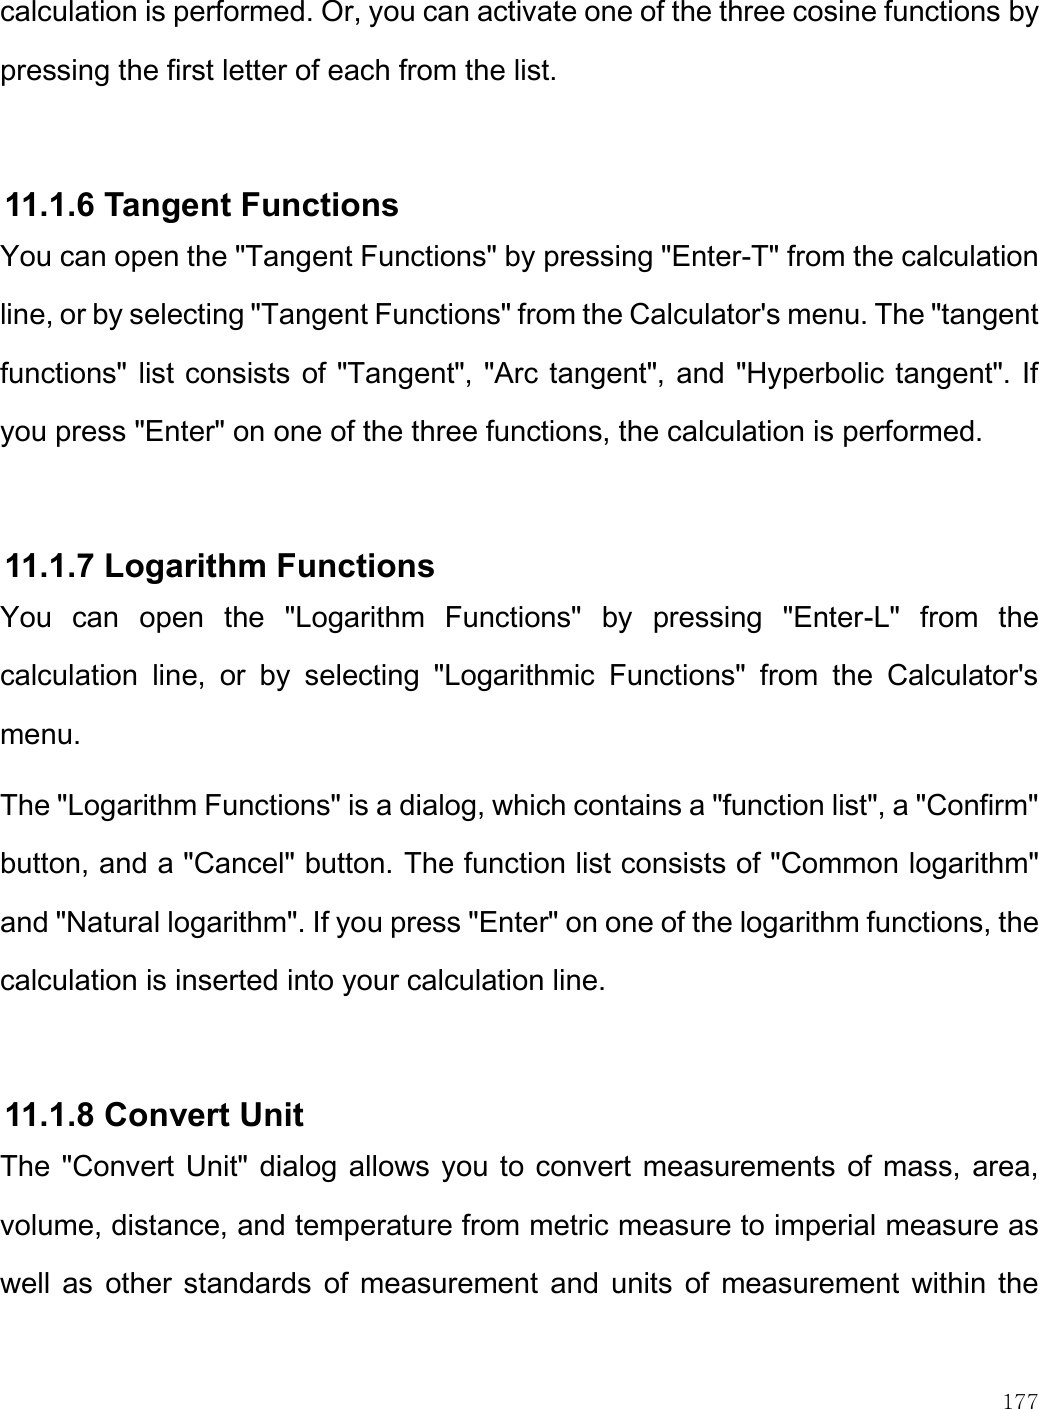    177  calculation is performed. Or, you can activate one of the three cosine functions by pressing the first letter of each from the list.  11.1.6 Tangent Functions You can open the &quot;Tangent Functions&quot; by pressing &quot;Enter-T&quot; from the calculation line, or by selecting &quot;Tangent Functions&quot; from the Calculator&apos;s menu. The &quot;tangent functions&quot; list consists of &quot;Tangent&quot;, &quot;Arc tangent&quot;, and &quot;Hyperbolic tangent&quot;. If you press &quot;Enter&quot; on one of the three functions, the calculation is performed.   11.1.7 Logarithm Functions You  can  open  the  &quot;Logarithm  Functions&quot;  by  pressing  &quot;Enter-L&quot;  from  the calculation  line,  or  by  selecting  &quot;Logarithmic  Functions&quot;  from  the  Calculator&apos;s menu. The &quot;Logarithm Functions&quot; is a dialog, which contains a &quot;function list&quot;, a &quot;Confirm&quot; button, and a &quot;Cancel&quot; button. The function list consists of &quot;Common logarithm&quot; and &quot;Natural logarithm&quot;. If you press &quot;Enter&quot; on one of the logarithm functions, the calculation is inserted into your calculation line.   11.1.8 Convert Unit  The &quot;Convert Unit&quot; dialog allows you to convert measurements of mass, area, volume, distance, and temperature from metric measure to imperial measure as well as  other standards  of  measurement and units of measurement within the 